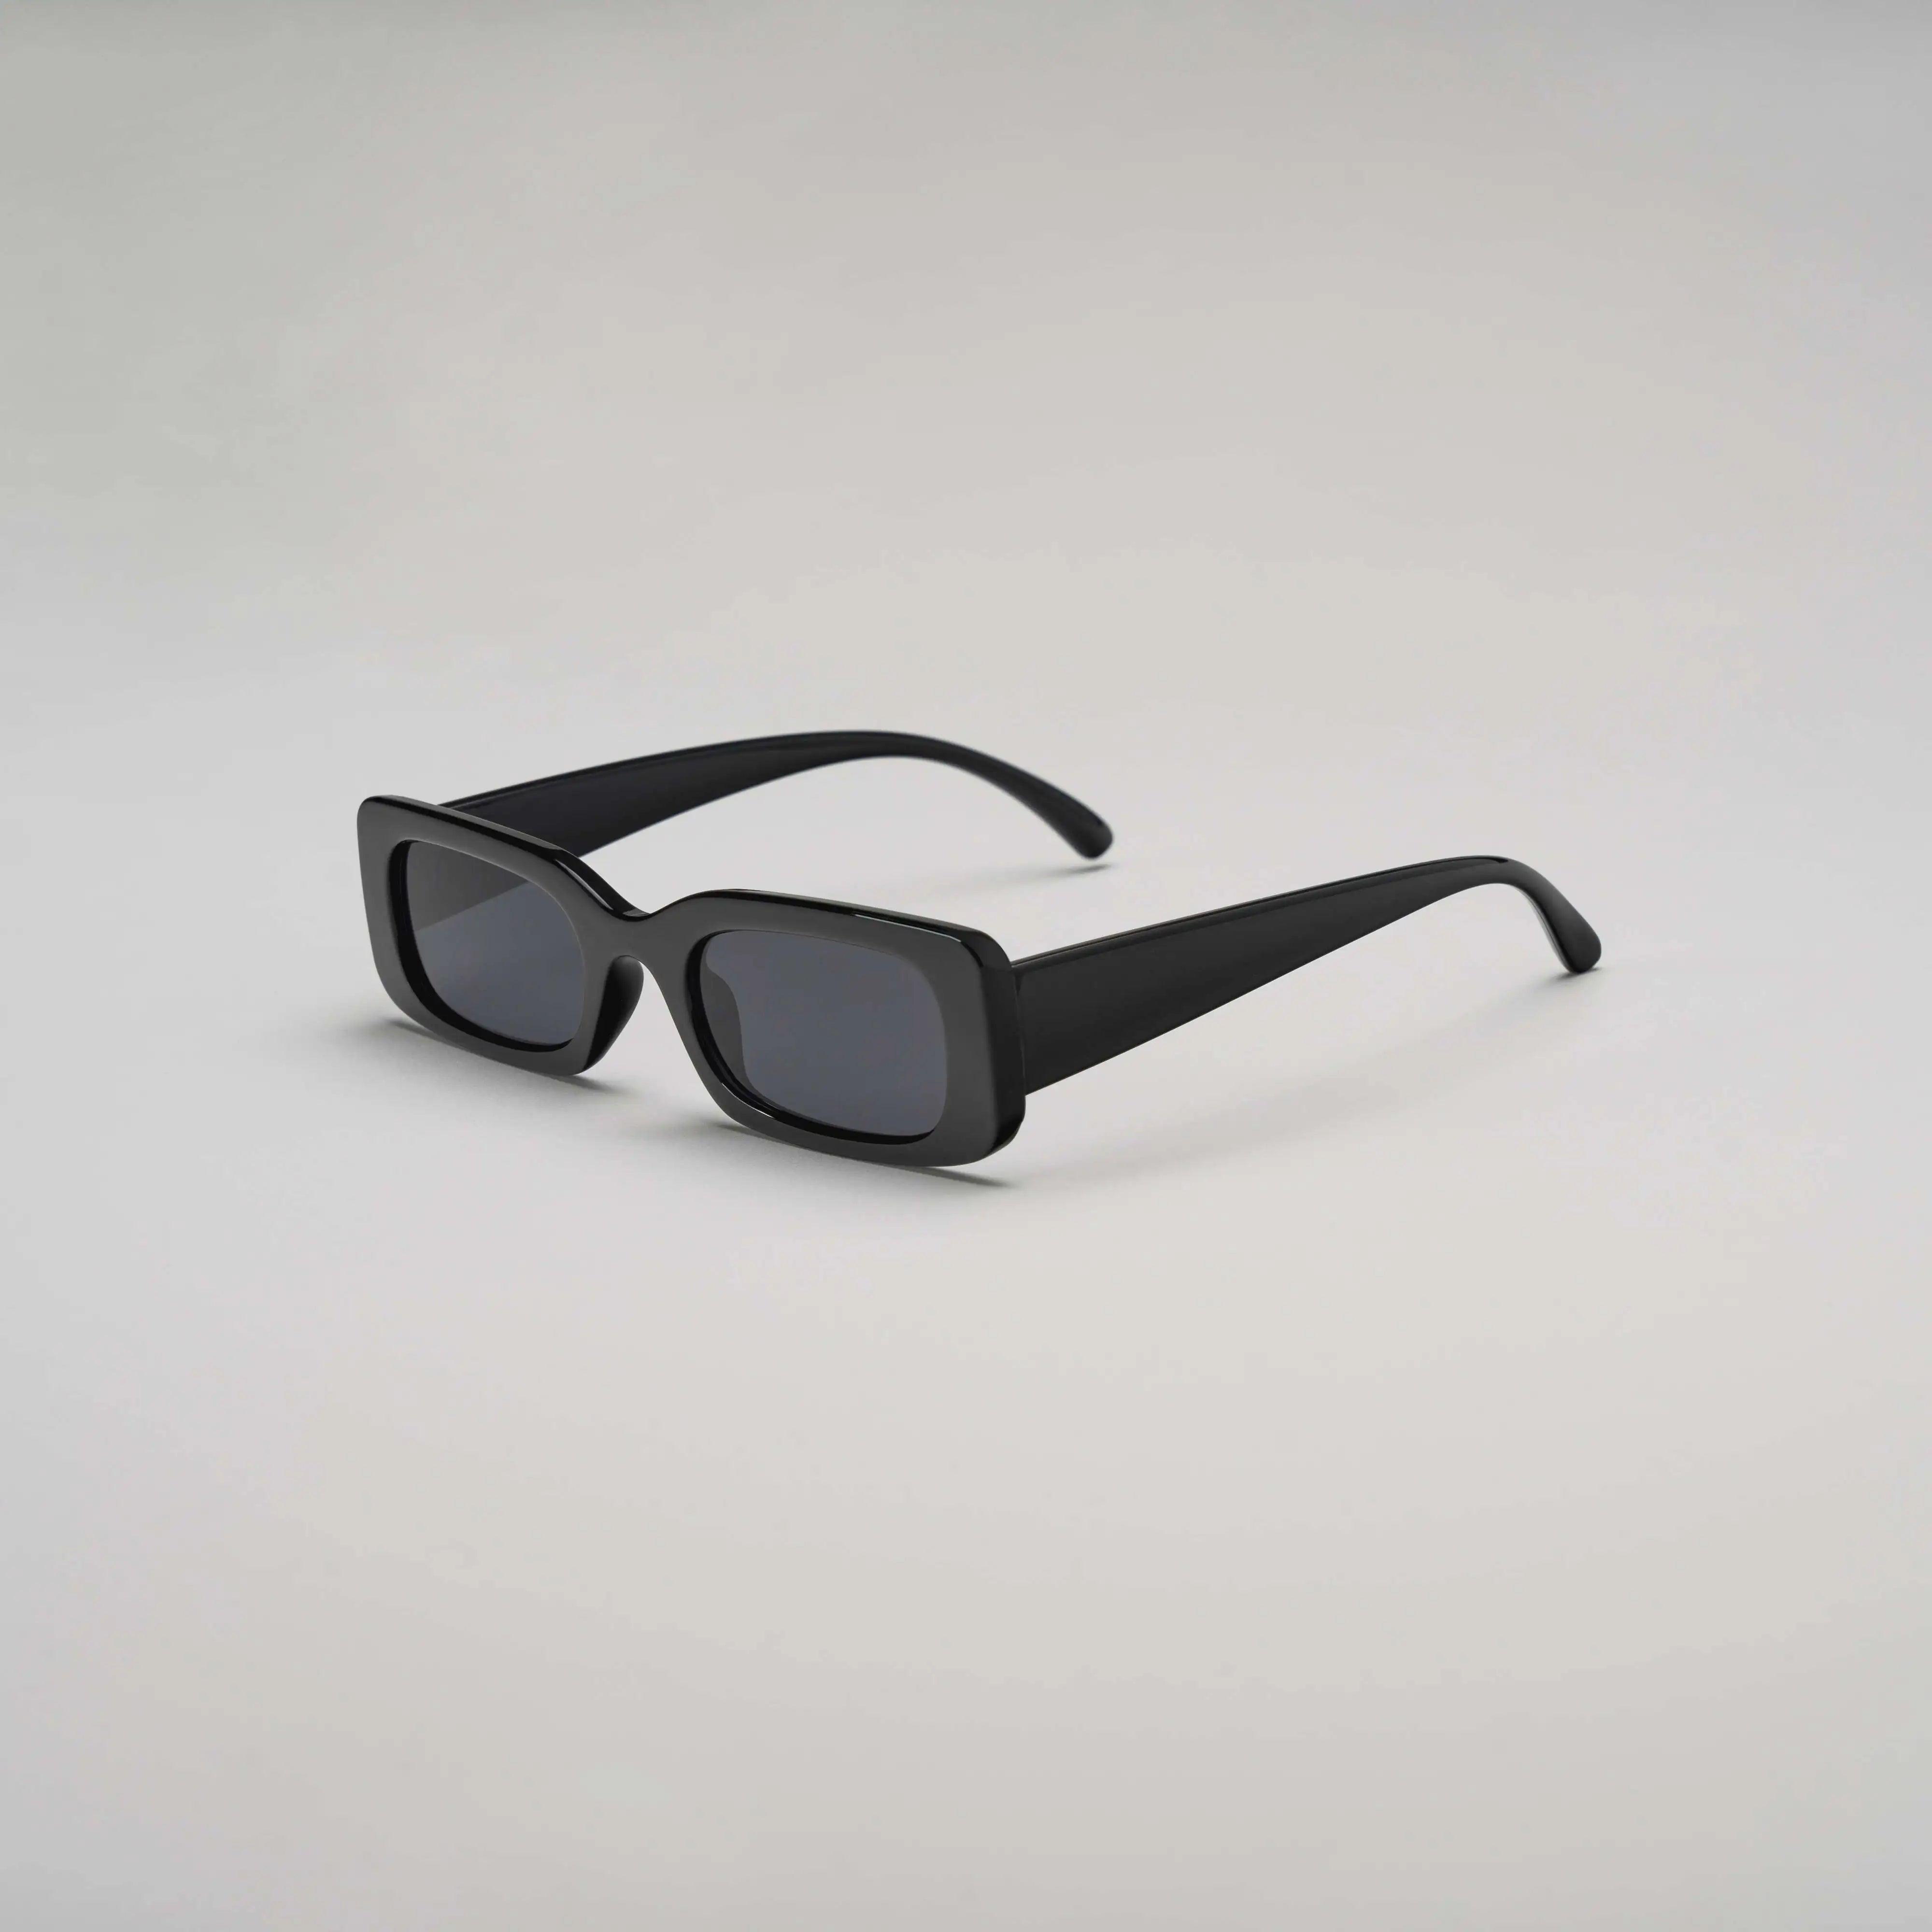 'Headliners' Classic Retro Sunglasses In Black With UV400 Protection And Free UK Shipping